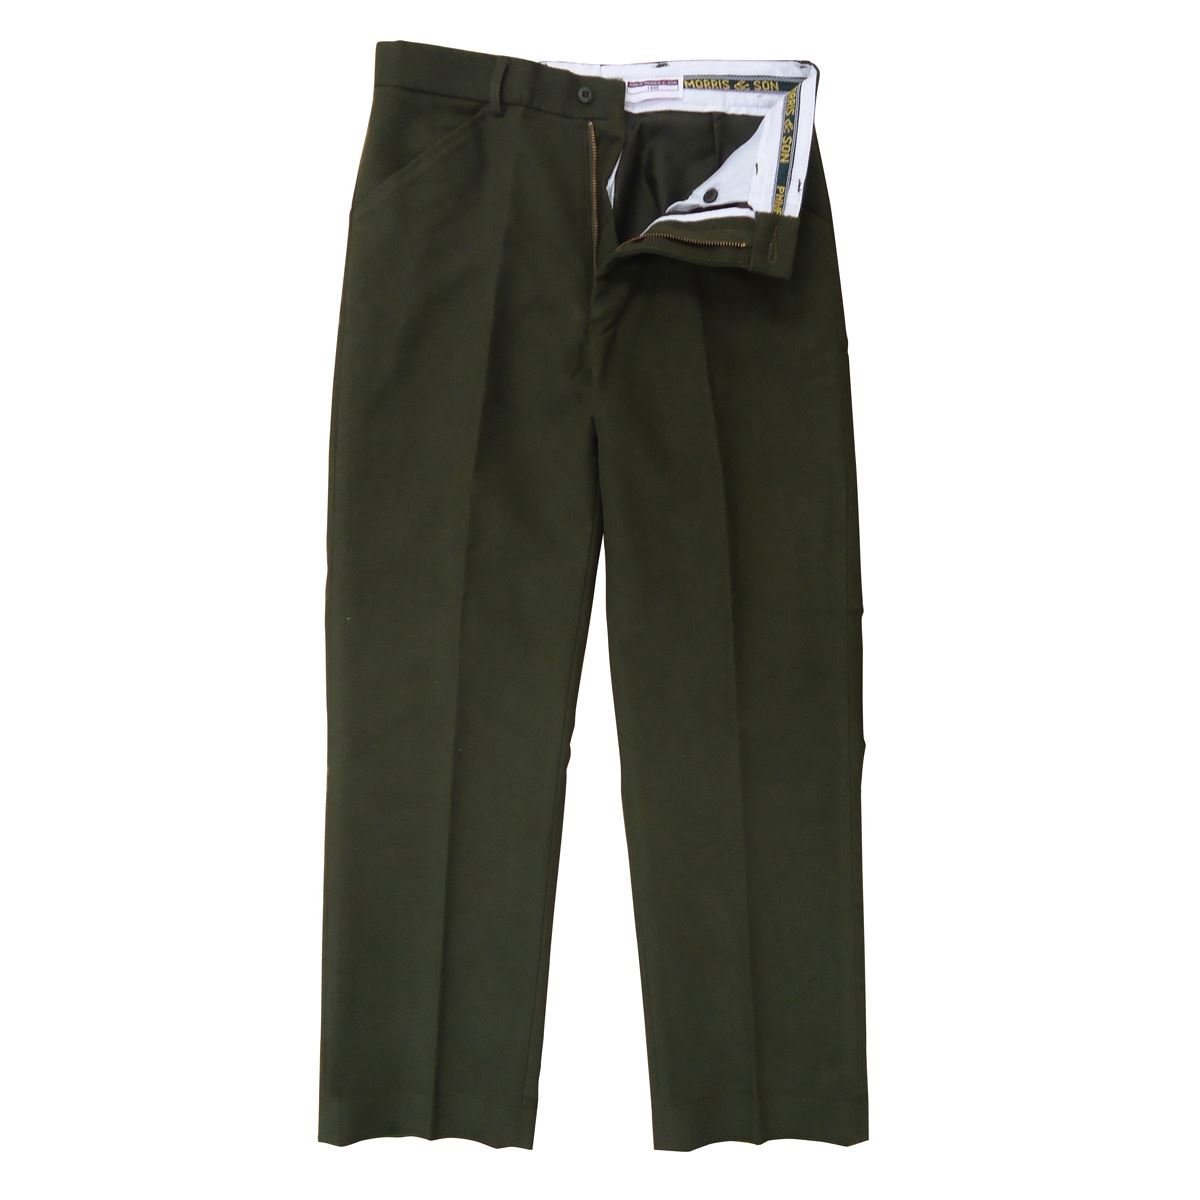 What fabric are the Heritage 1845 mens moleskin trousers made of?